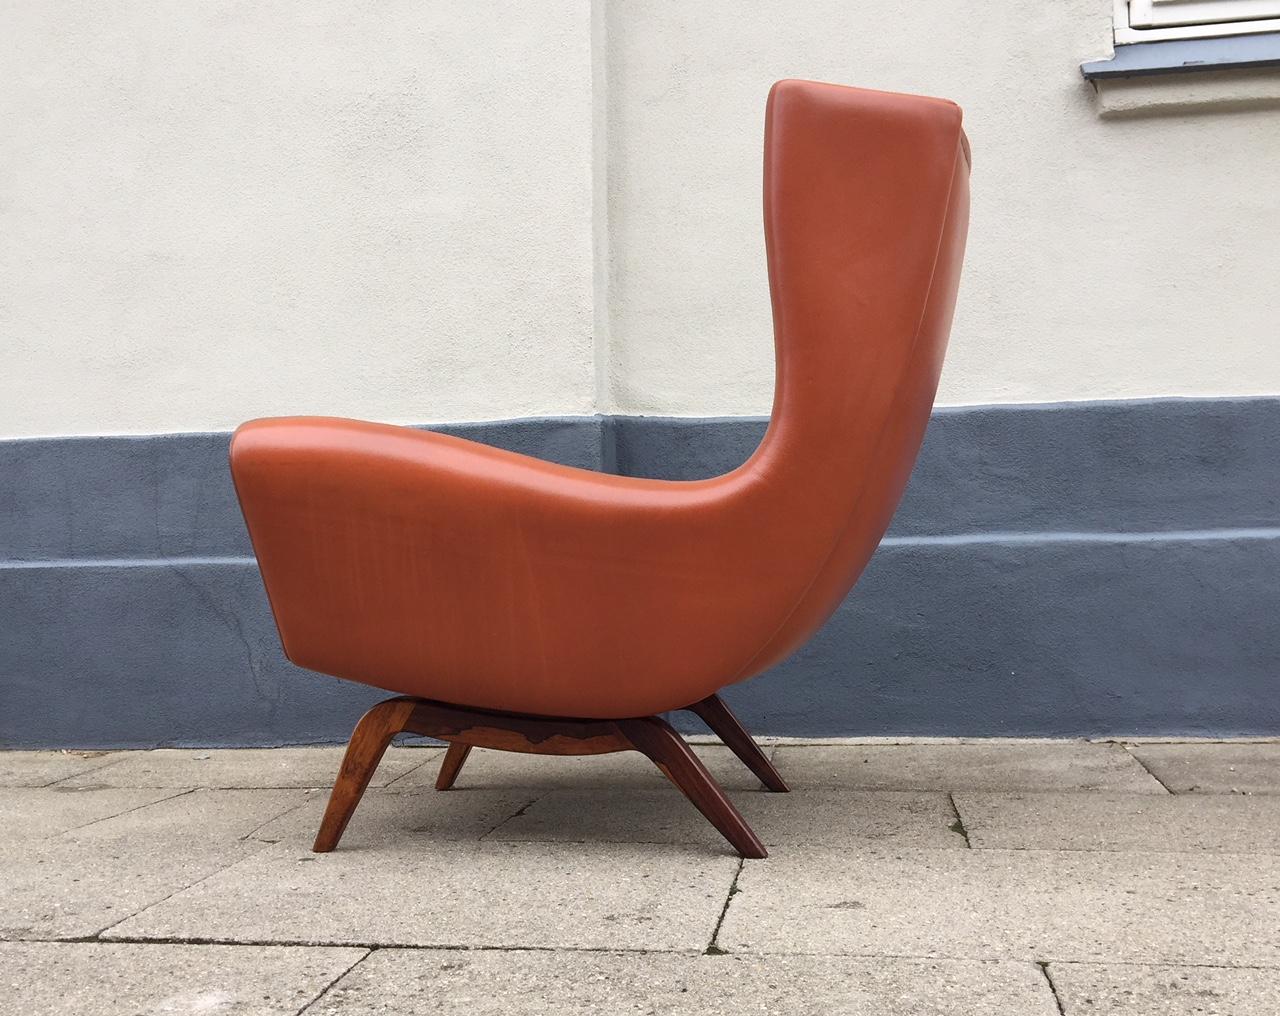 This highback easy chair in cognac-colored leather was designed by Illum Wikkelsø in 1959 and manufactured by Søren Wiladsen in Denmark. This chair is commonly referred to as model SW 110 and also features solid Brazilian rosewood legs that have